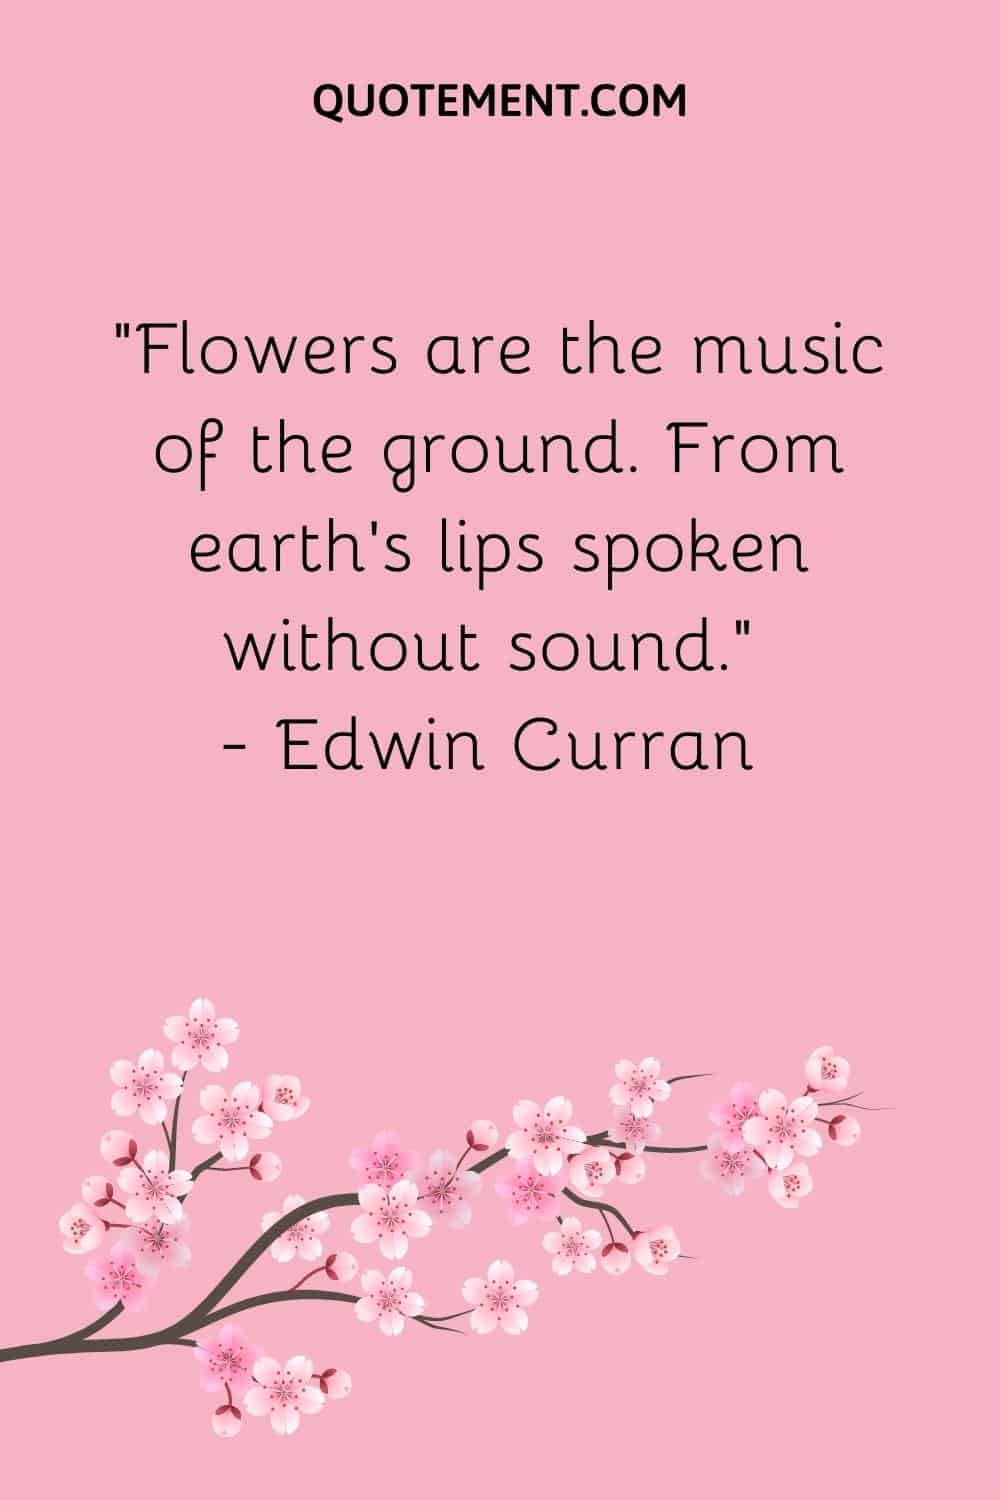 “Flowers are the music of the ground. From earth’s lips spoken without sound.” — Edwin Curran